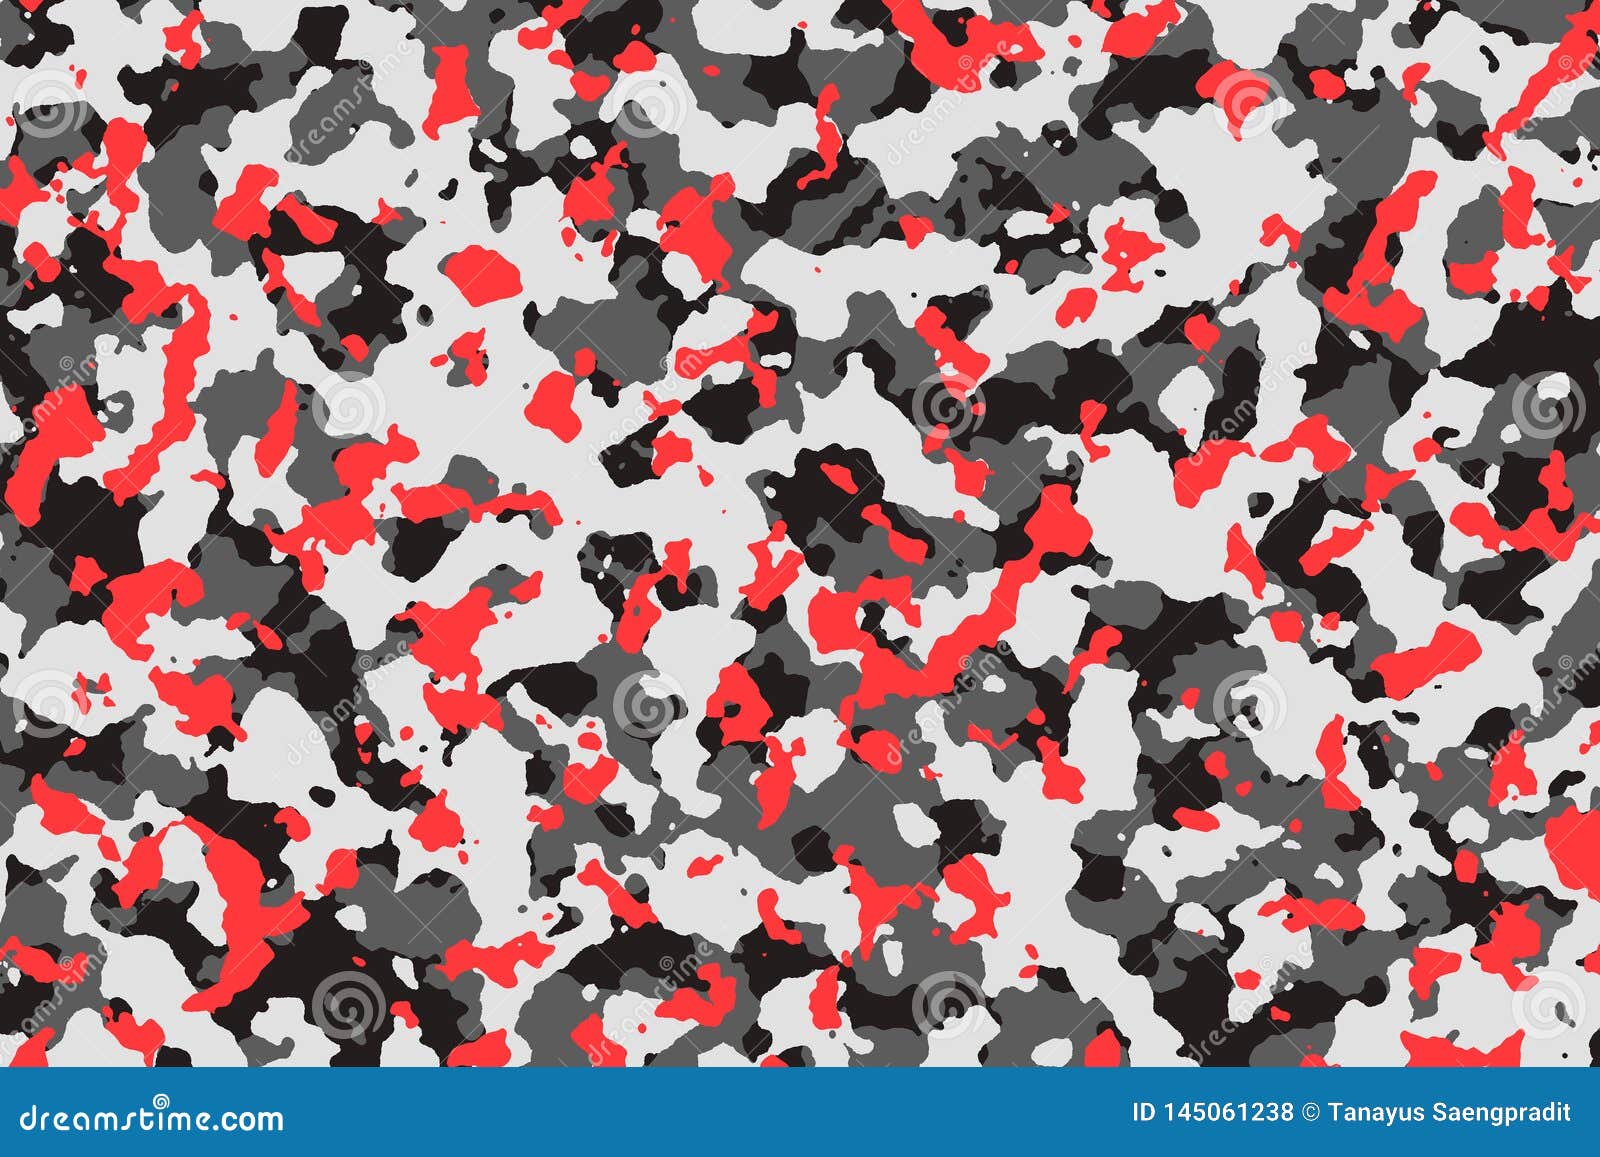 https://thumbs.dreamstime.com/z/red-gray-camouflage-pattern-blackground-black-texture-illustration-145061238.jpg